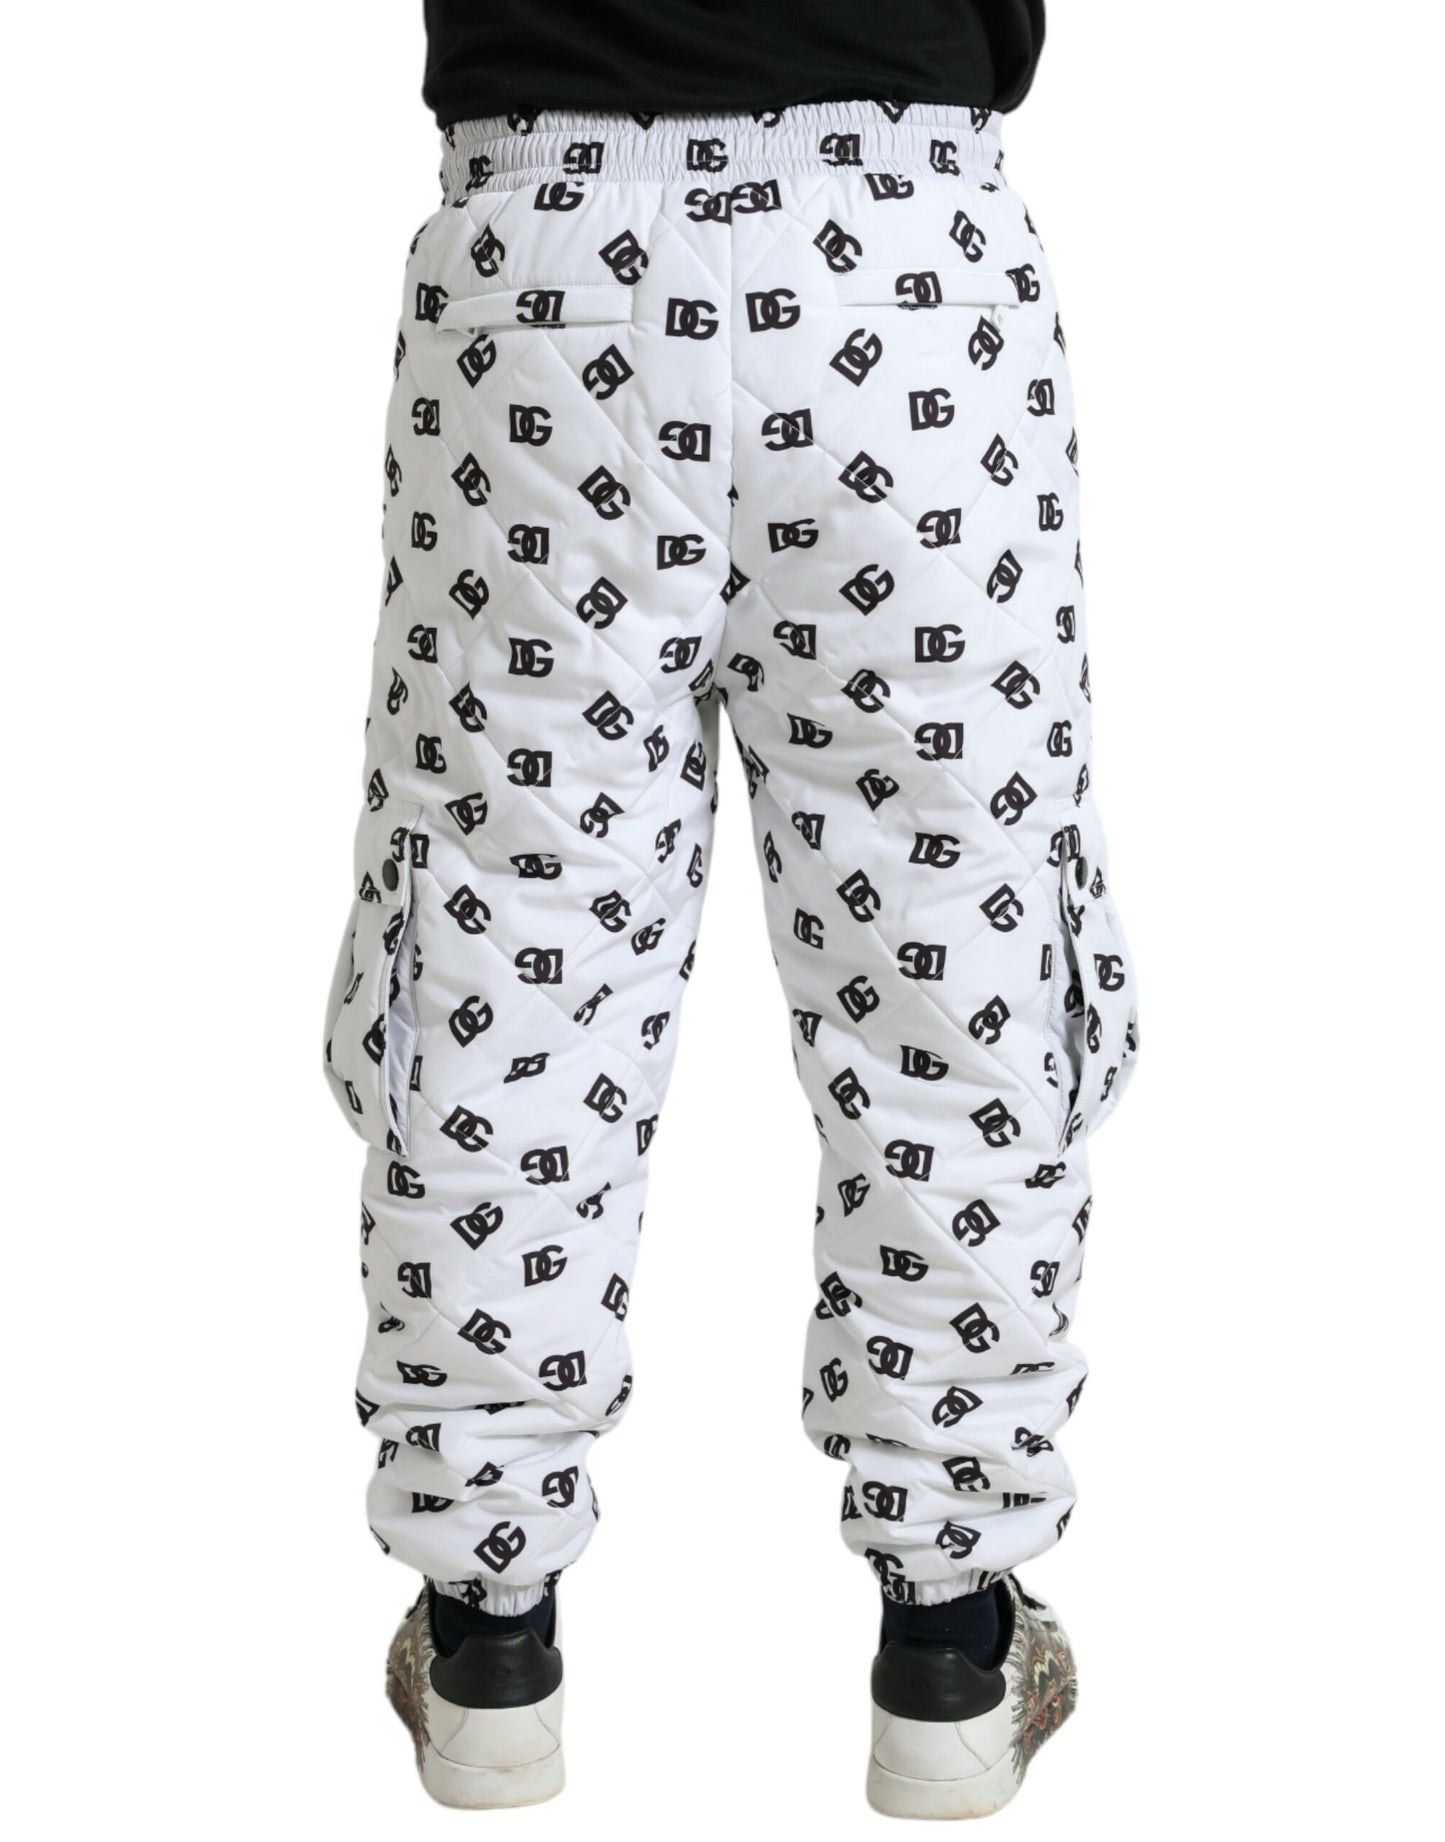 Chic White Jogger Pants with Iconic DG Print